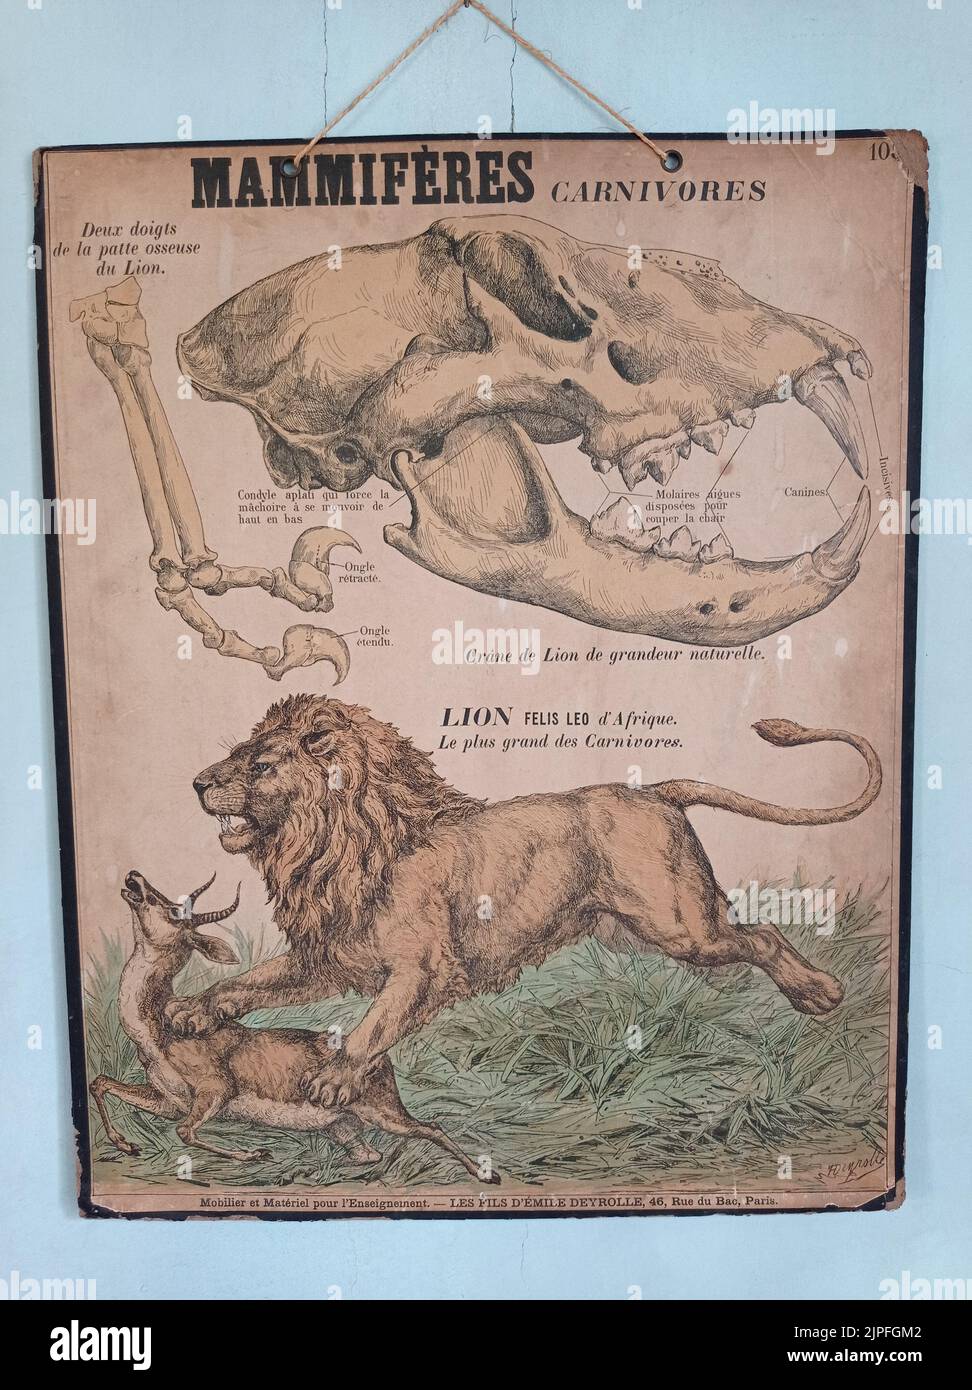 AFFICHE ANCIENNE MAMMIFÈRES CARNIVORES Stock Photo